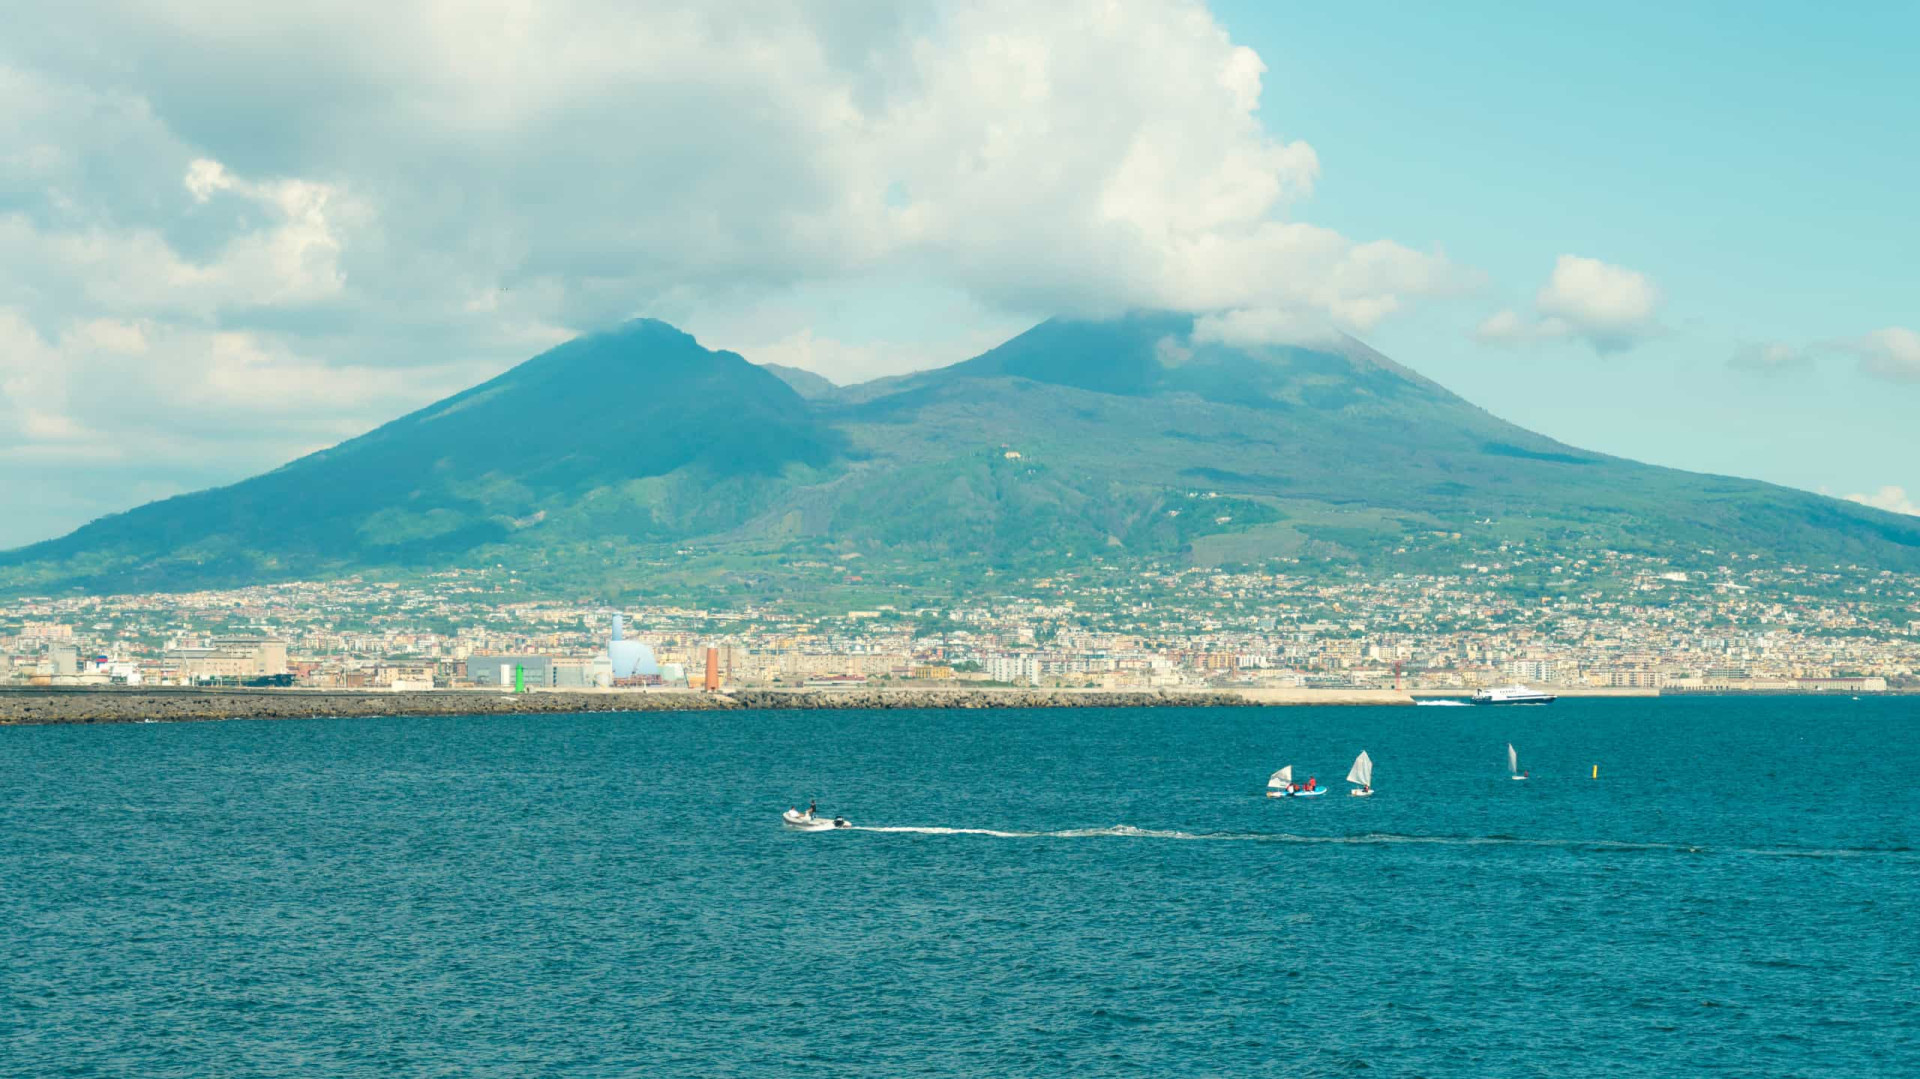 While you're visiting Pompeii, don't miss out on the opportunity of visiting and climbing Vesuvius!<p><a href="https://www.msn.com/en-us/community/channel/vid-7xx8mnucu55yw63we9va2gwr7uihbxwc68fxqp25x6tg4ftibpra?cvid=94631541bc0f4f89bfd59158d696ad7e">Follow us and access great exclusive content every day</a></p>